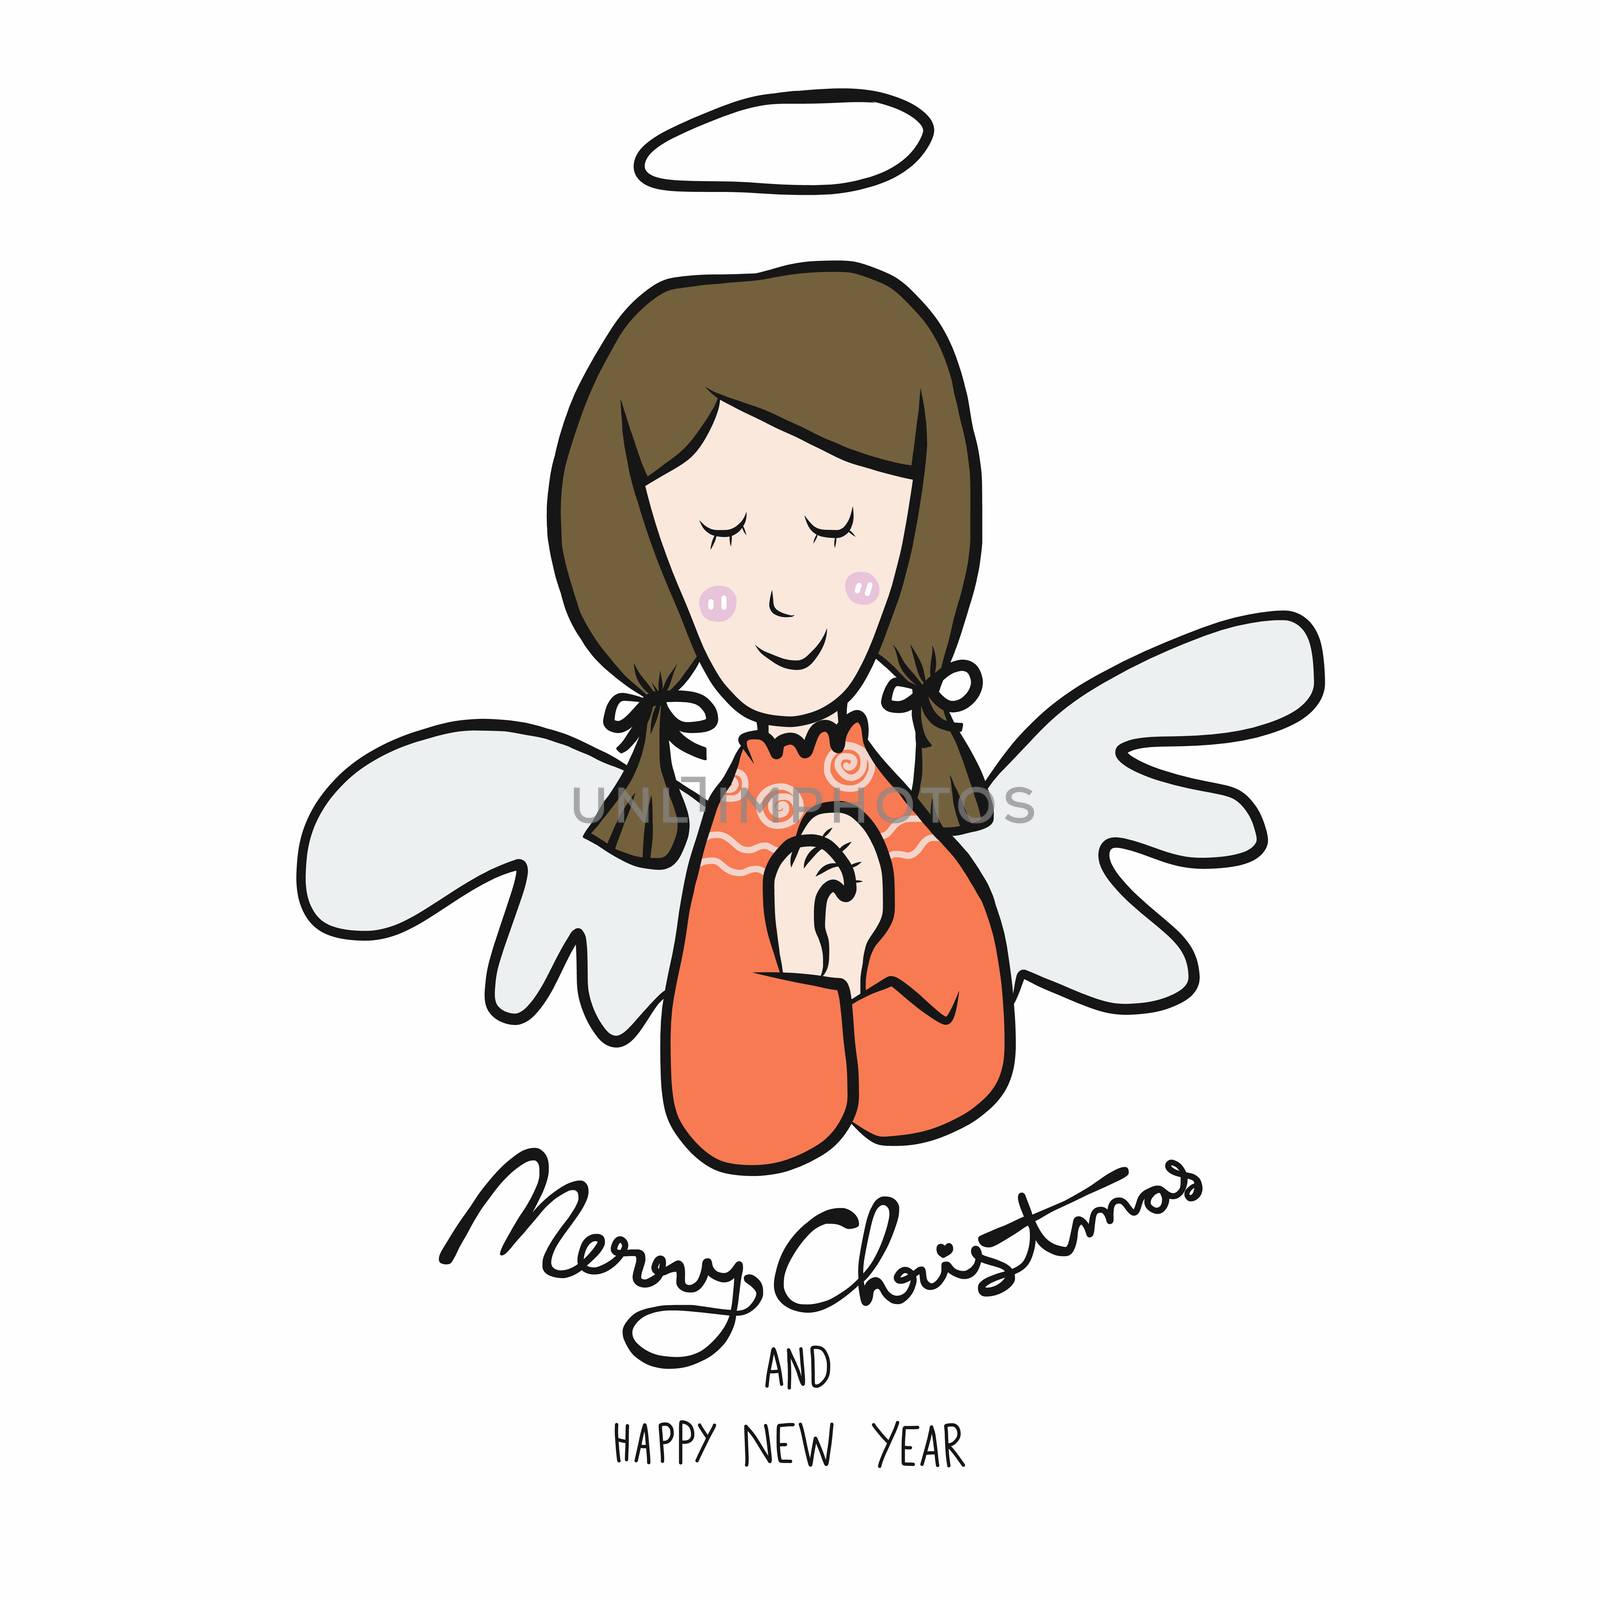 Angel Merry Christmas and Happy New Year cartoon vector illustration doodle style by Yoopho